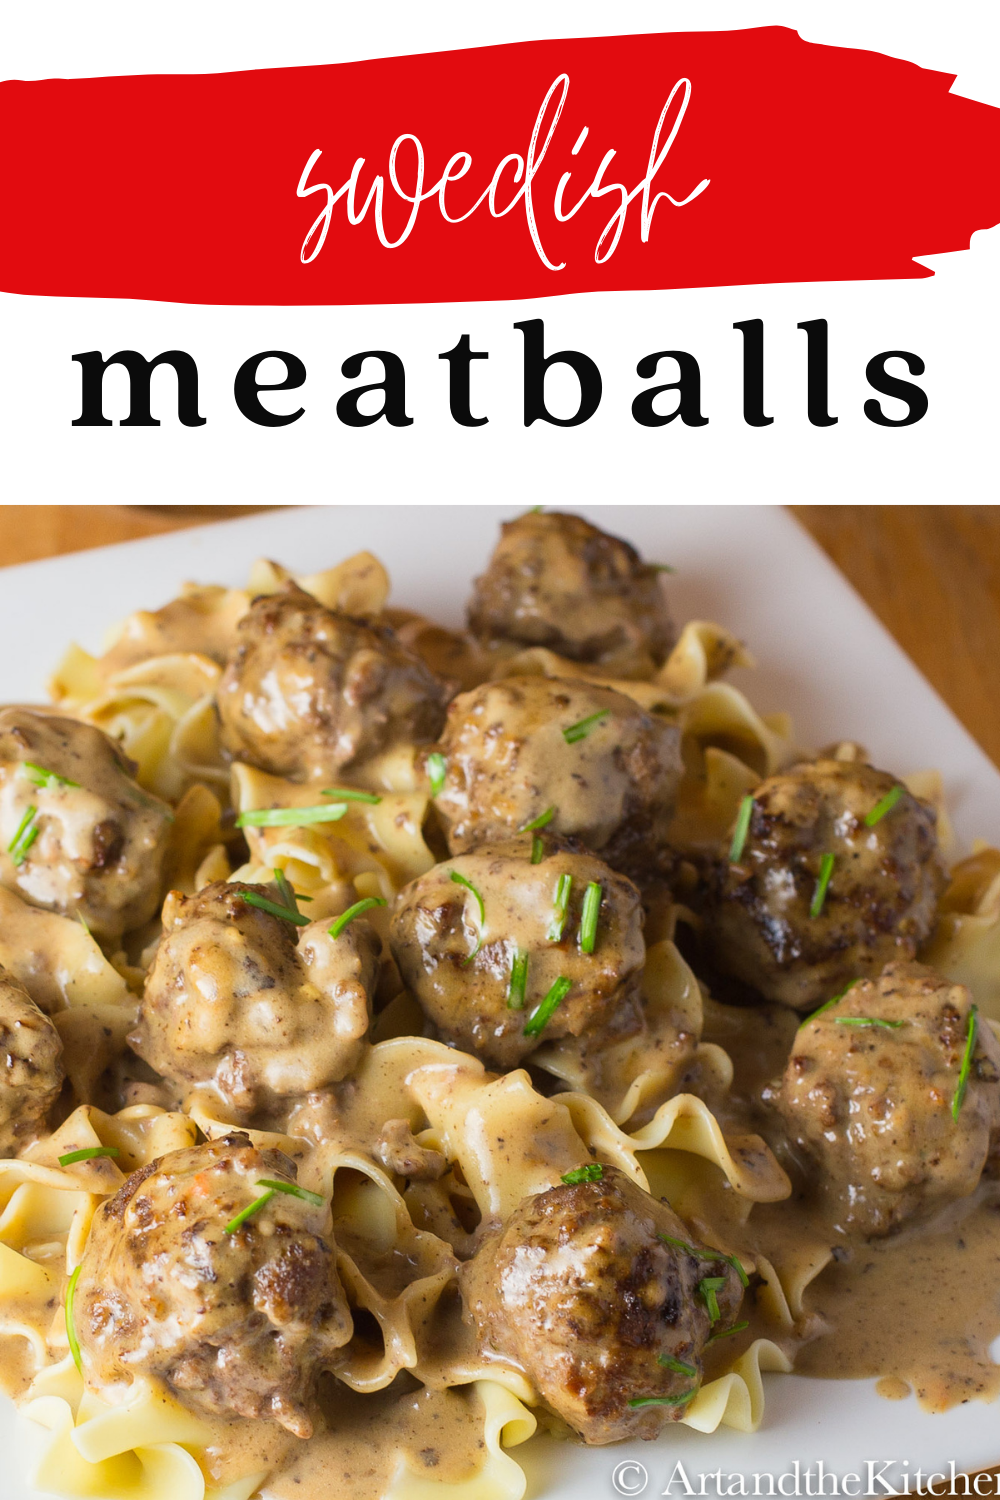 Amazing Swedish Meatballs recipe, even better than Ikea! Easy to make meatballs full of flavour, with the most amazing creamy gravy sauce! via @artandthekitch